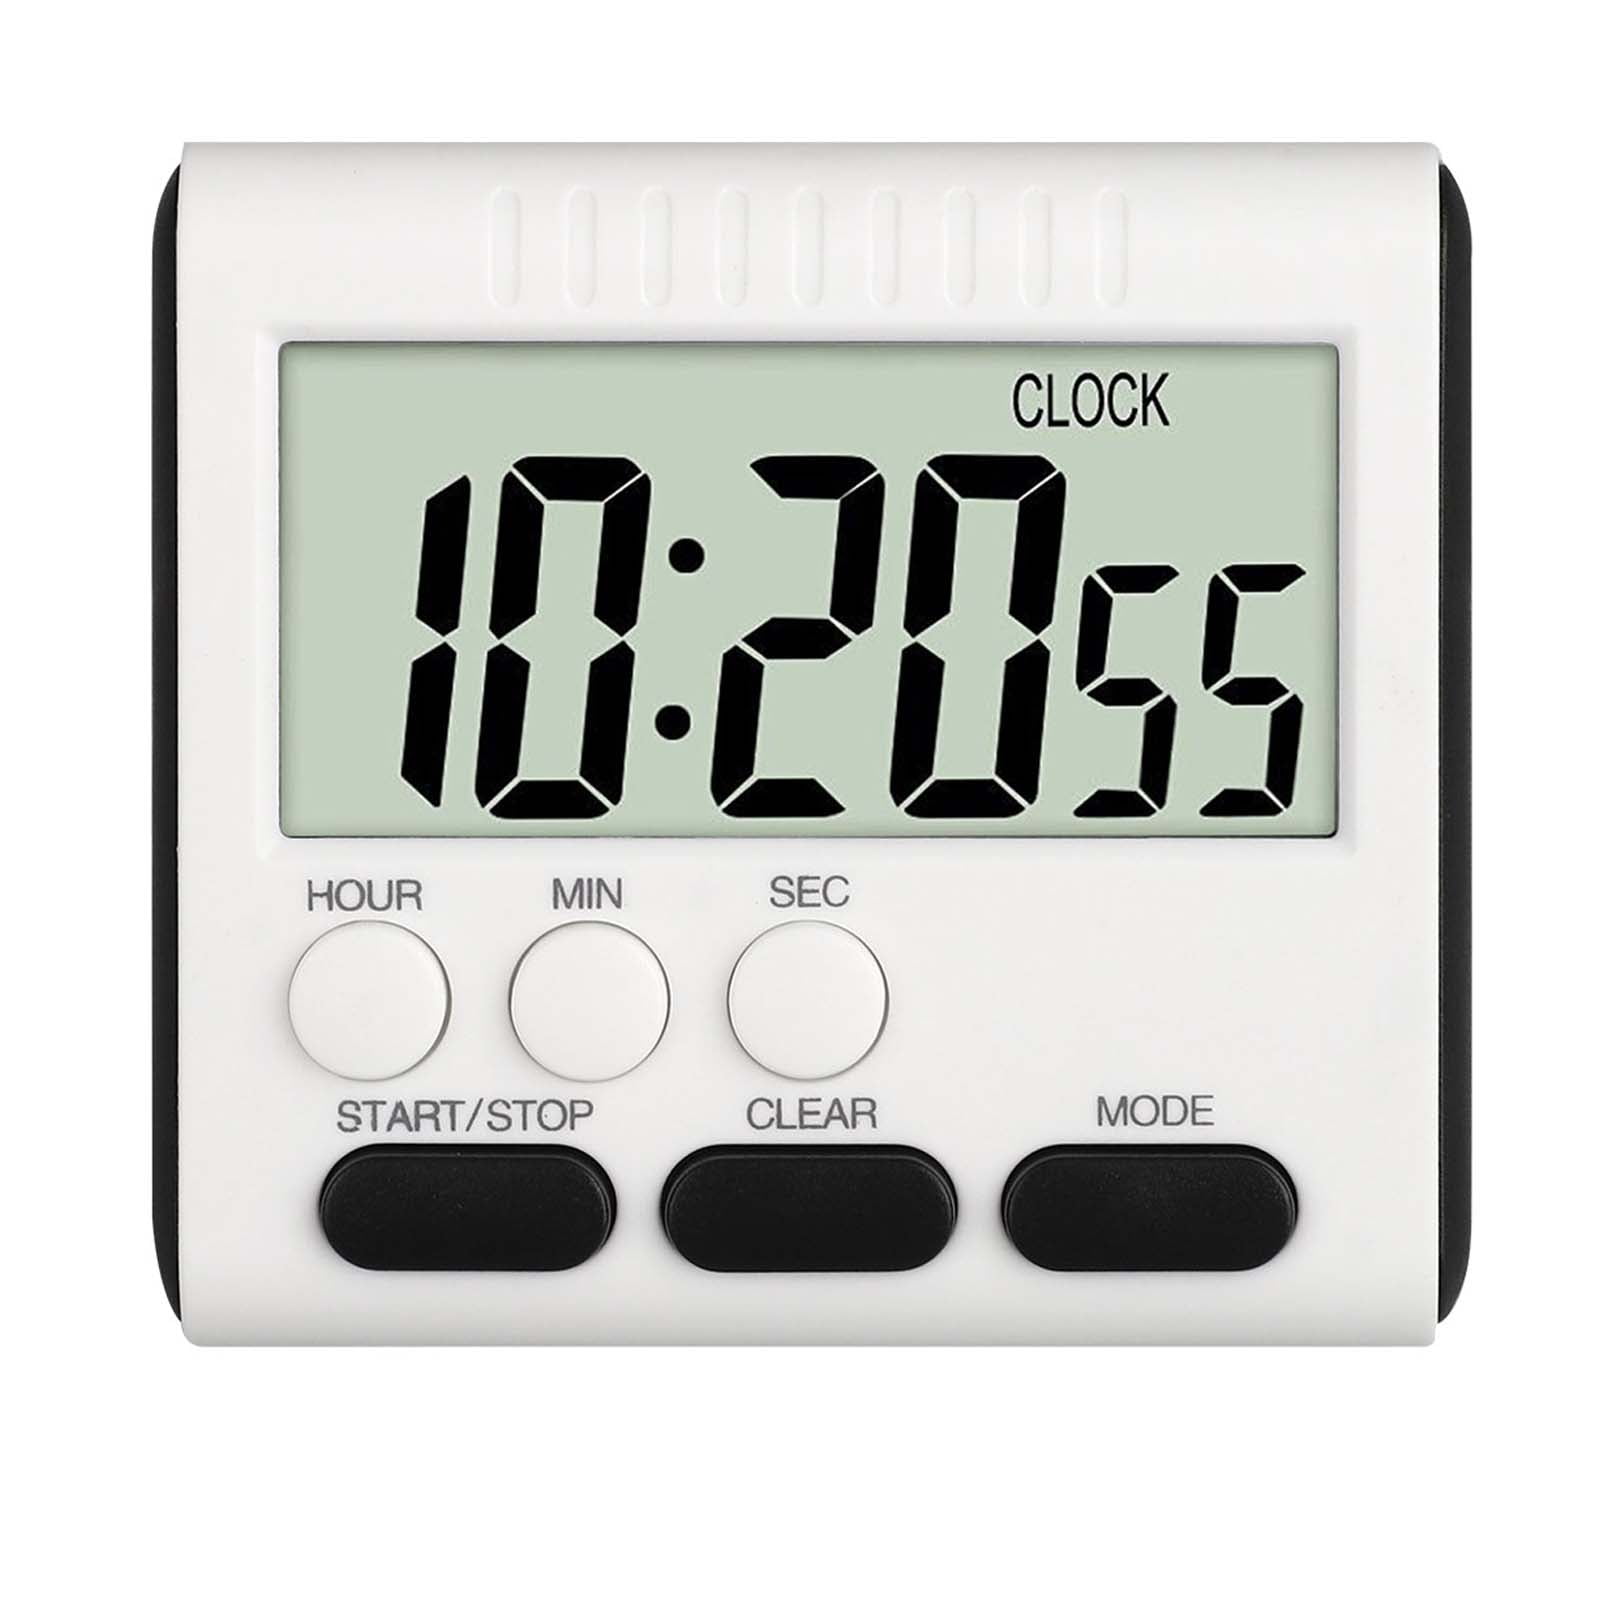  FCXJTU Digital Kitchen Timer, Large Display Cooking timer Cycle  Count up/down timer with Digits Directly Input, Loud Alarm, Flash light  Strong Magnetic Back Stand for Baking, Shower, Bathroom, Teacher : Home